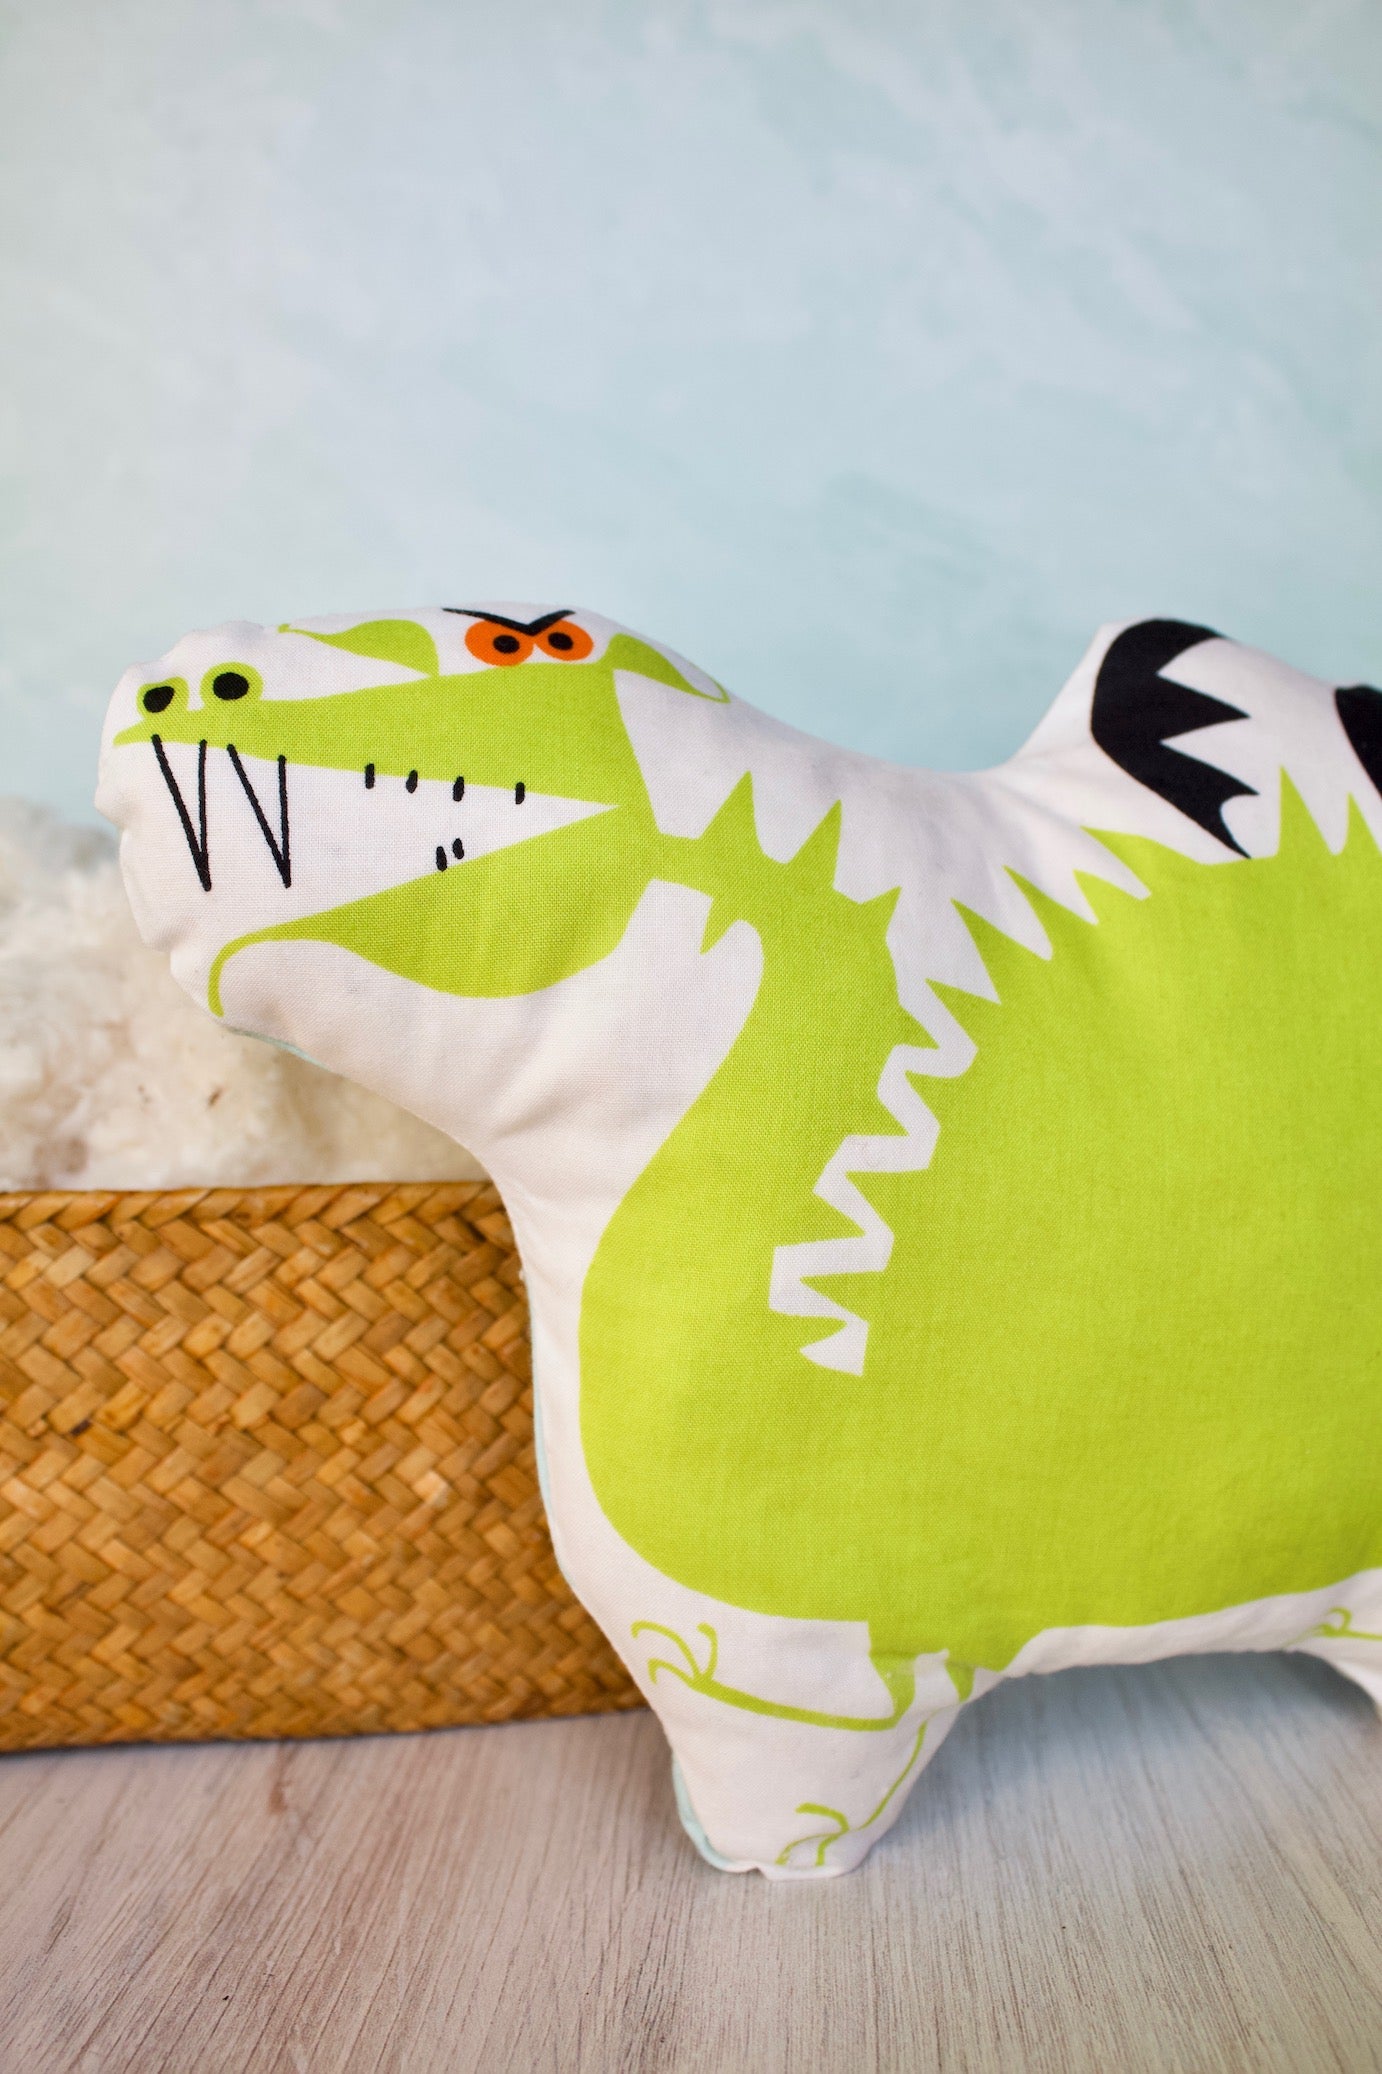 Puff the Dragon Toy-The Blue Peony-Animal_Dragon,Category_Organic Toy,Department_Organic Baby,Material_Organic Cotton,Pattern_Ed Emberley's Animals,Theme_Animal